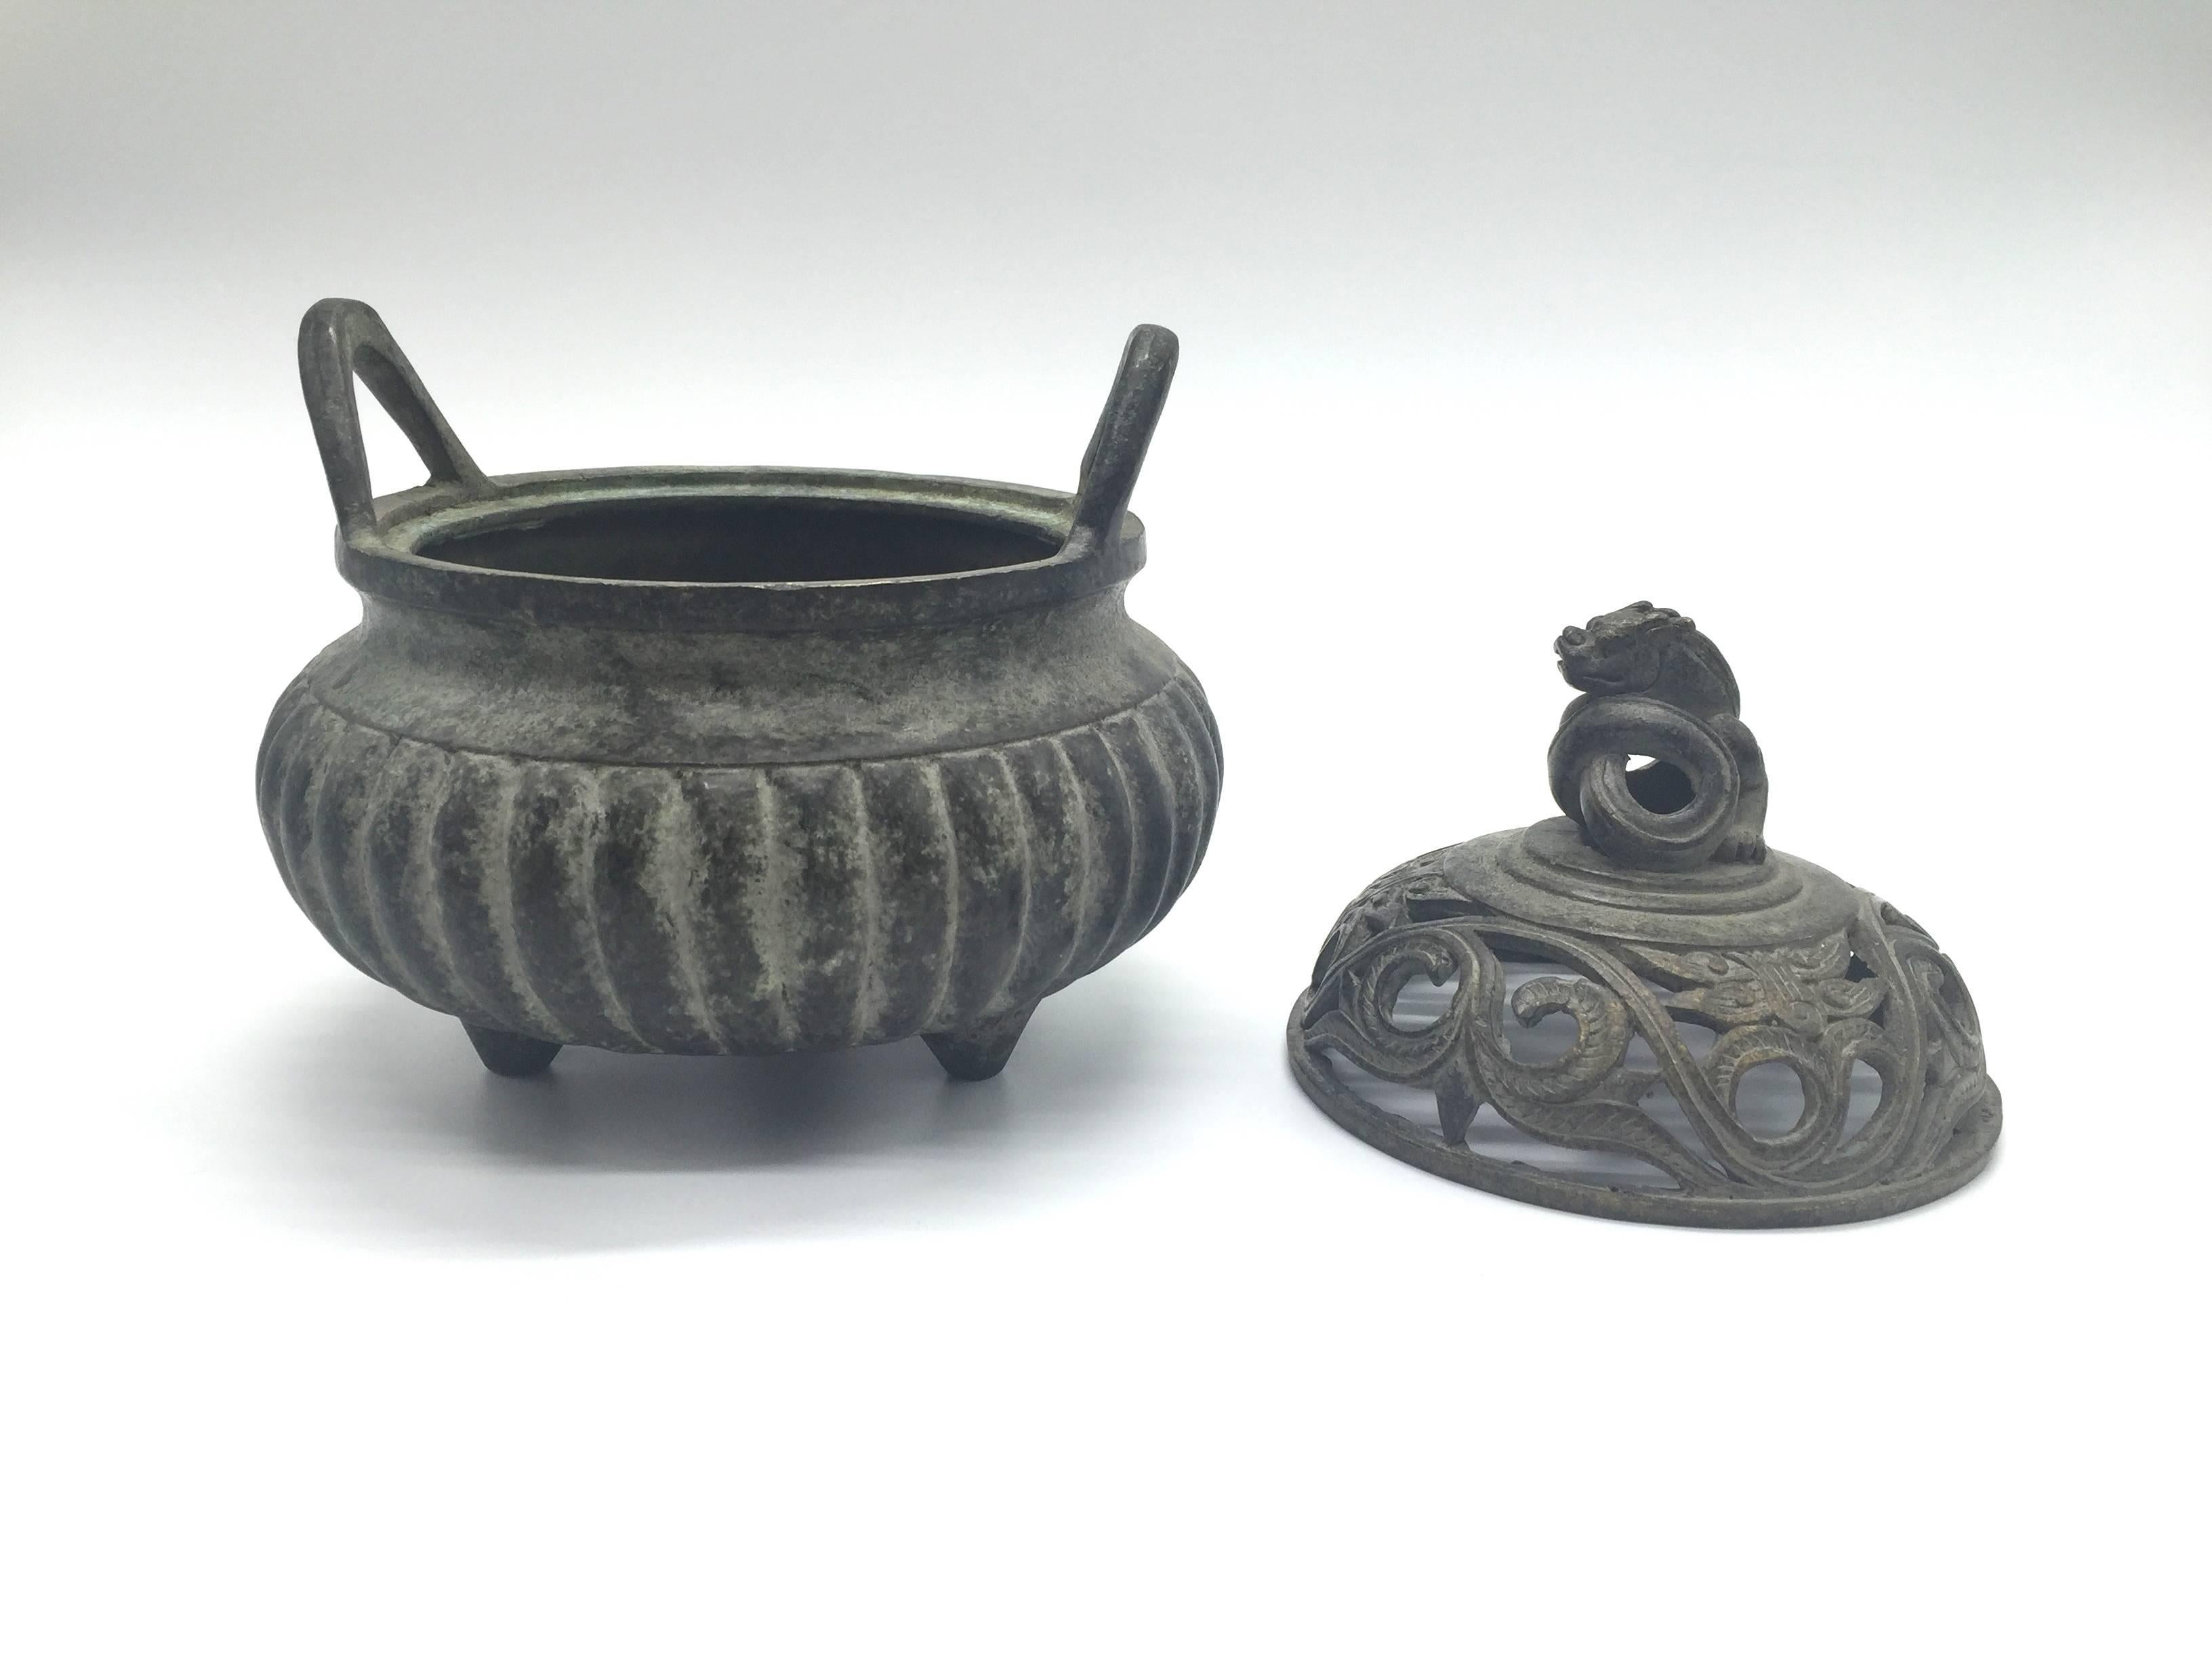 Exquisite Ming Xuan De style incense burner features a coiled dragon as finial and a melon bodice. The lid has open work with the motif of beasts, an ancient symbol for power and good luck. The traditional 3-foot design is typical of Ming style. It